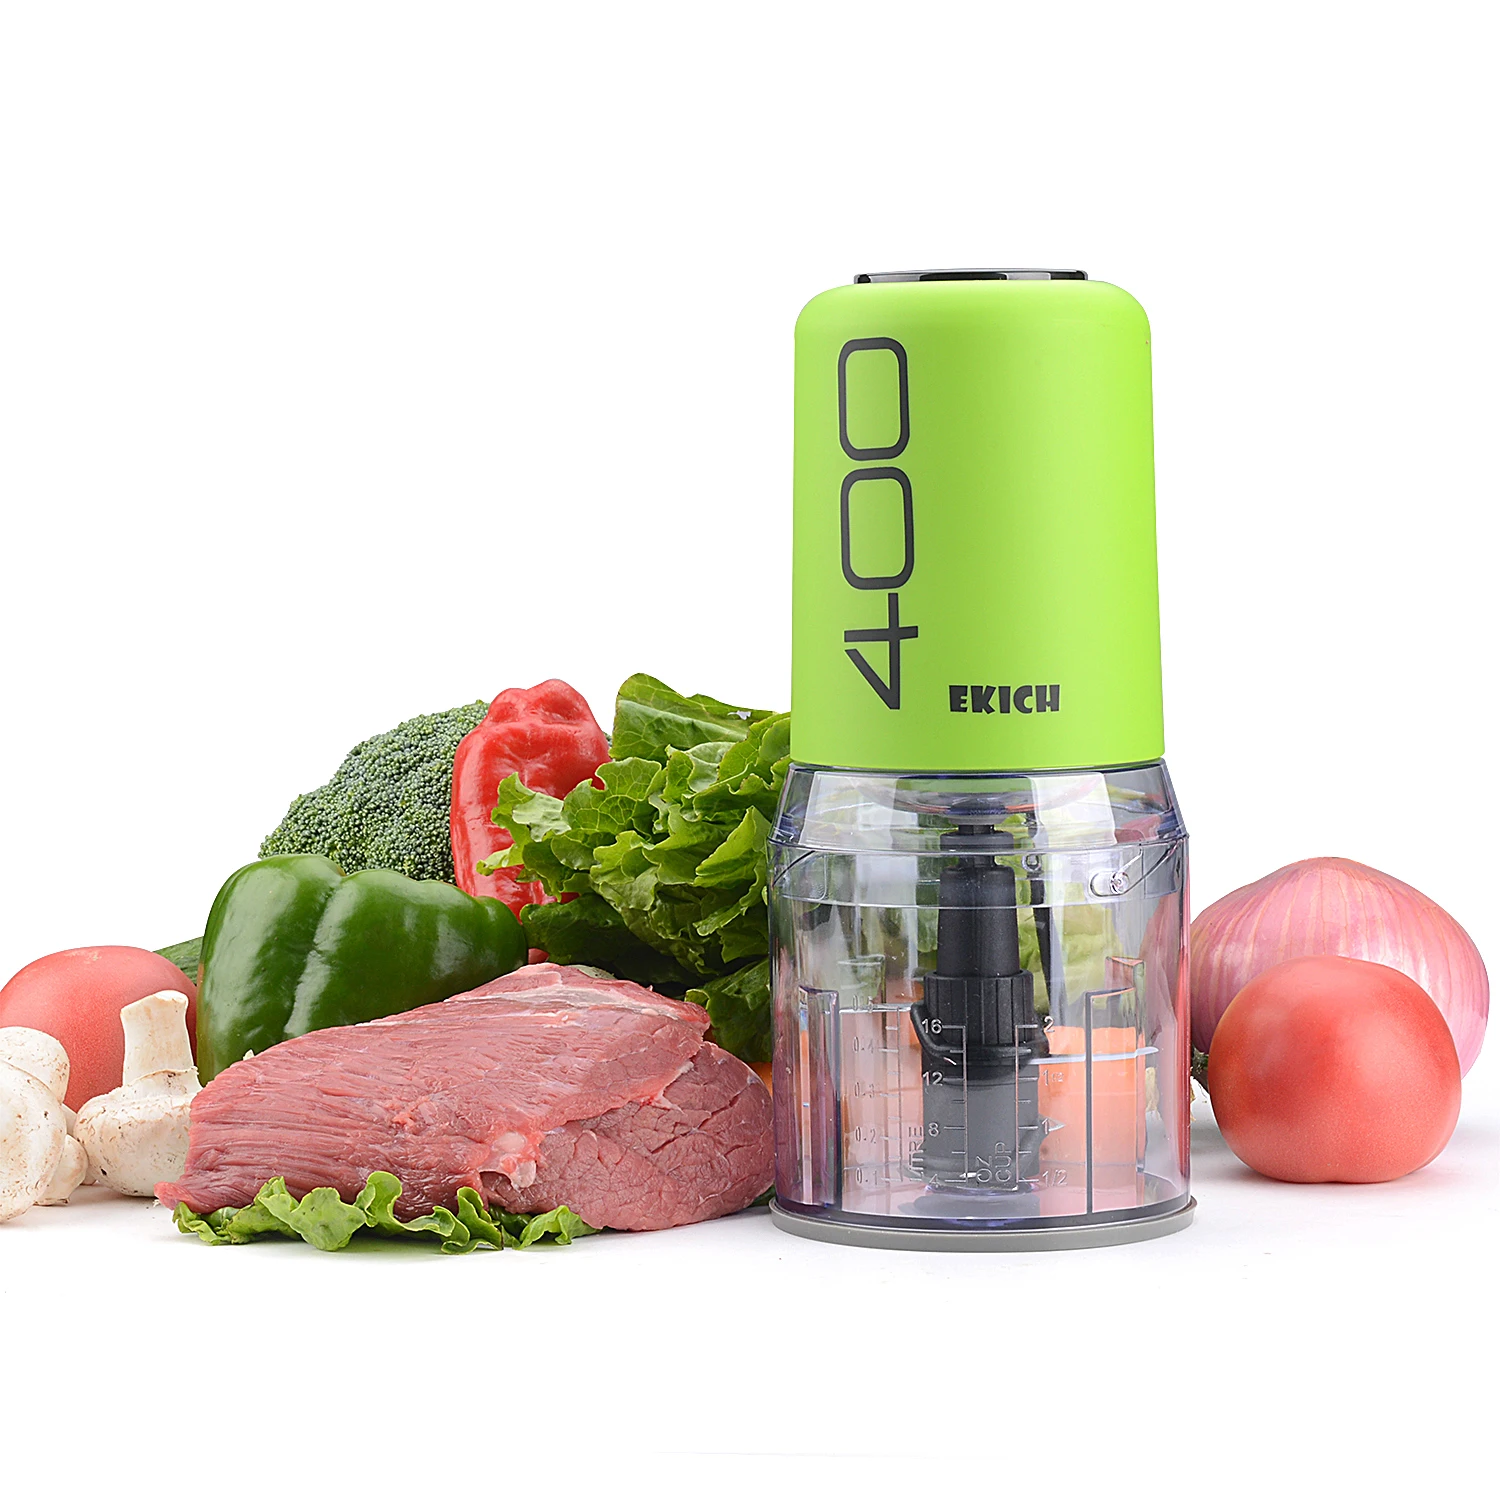 
HFP-501 commercial blender home electric baby food processor 